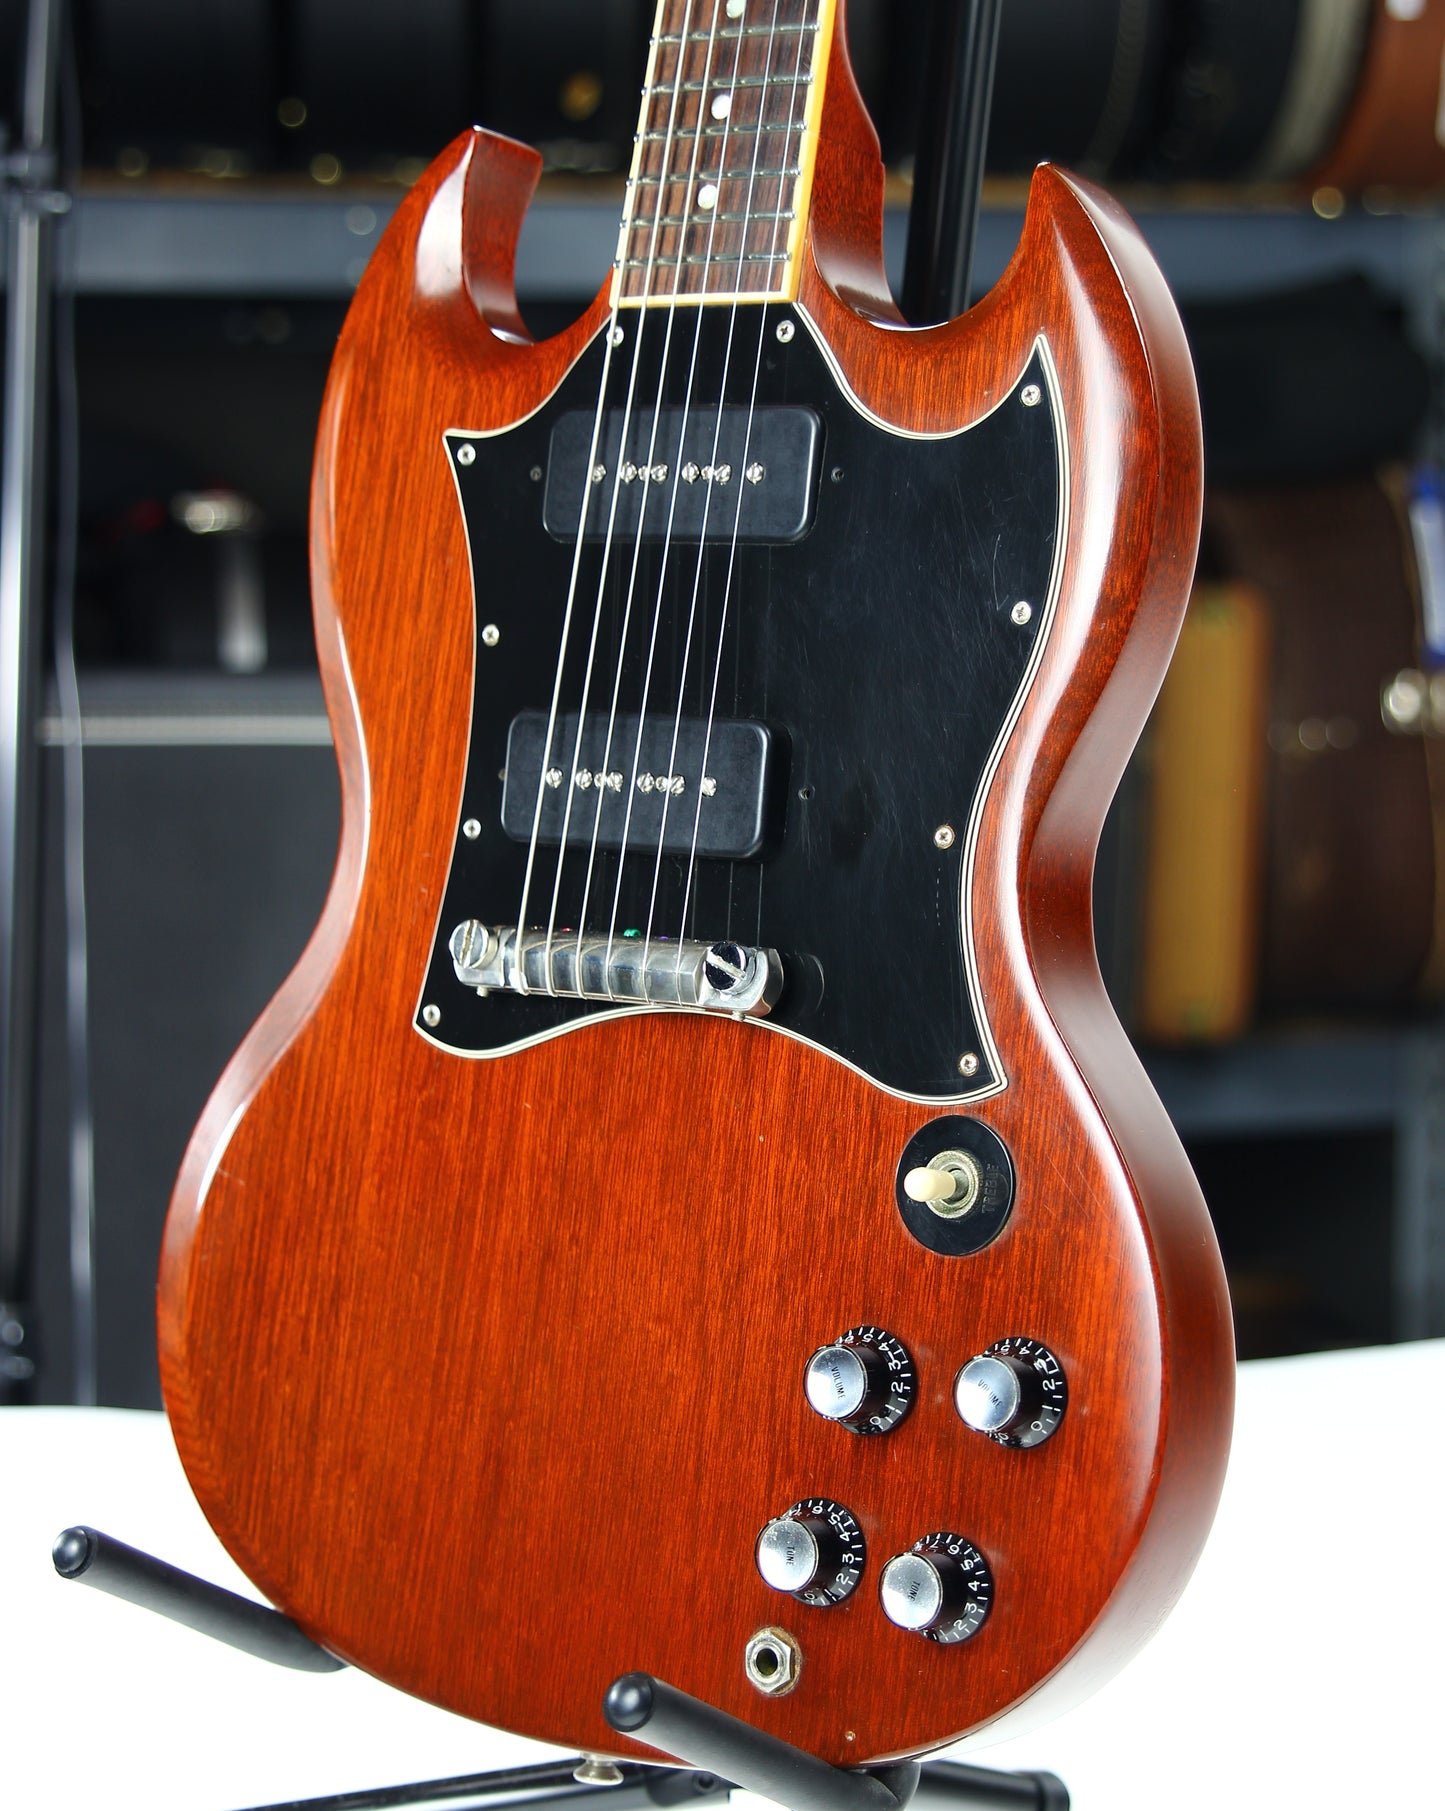 2001 Gibson Pete Townshend SG Special Signature Model - Cherry Red, 2 P90's, Plays Great, USA!